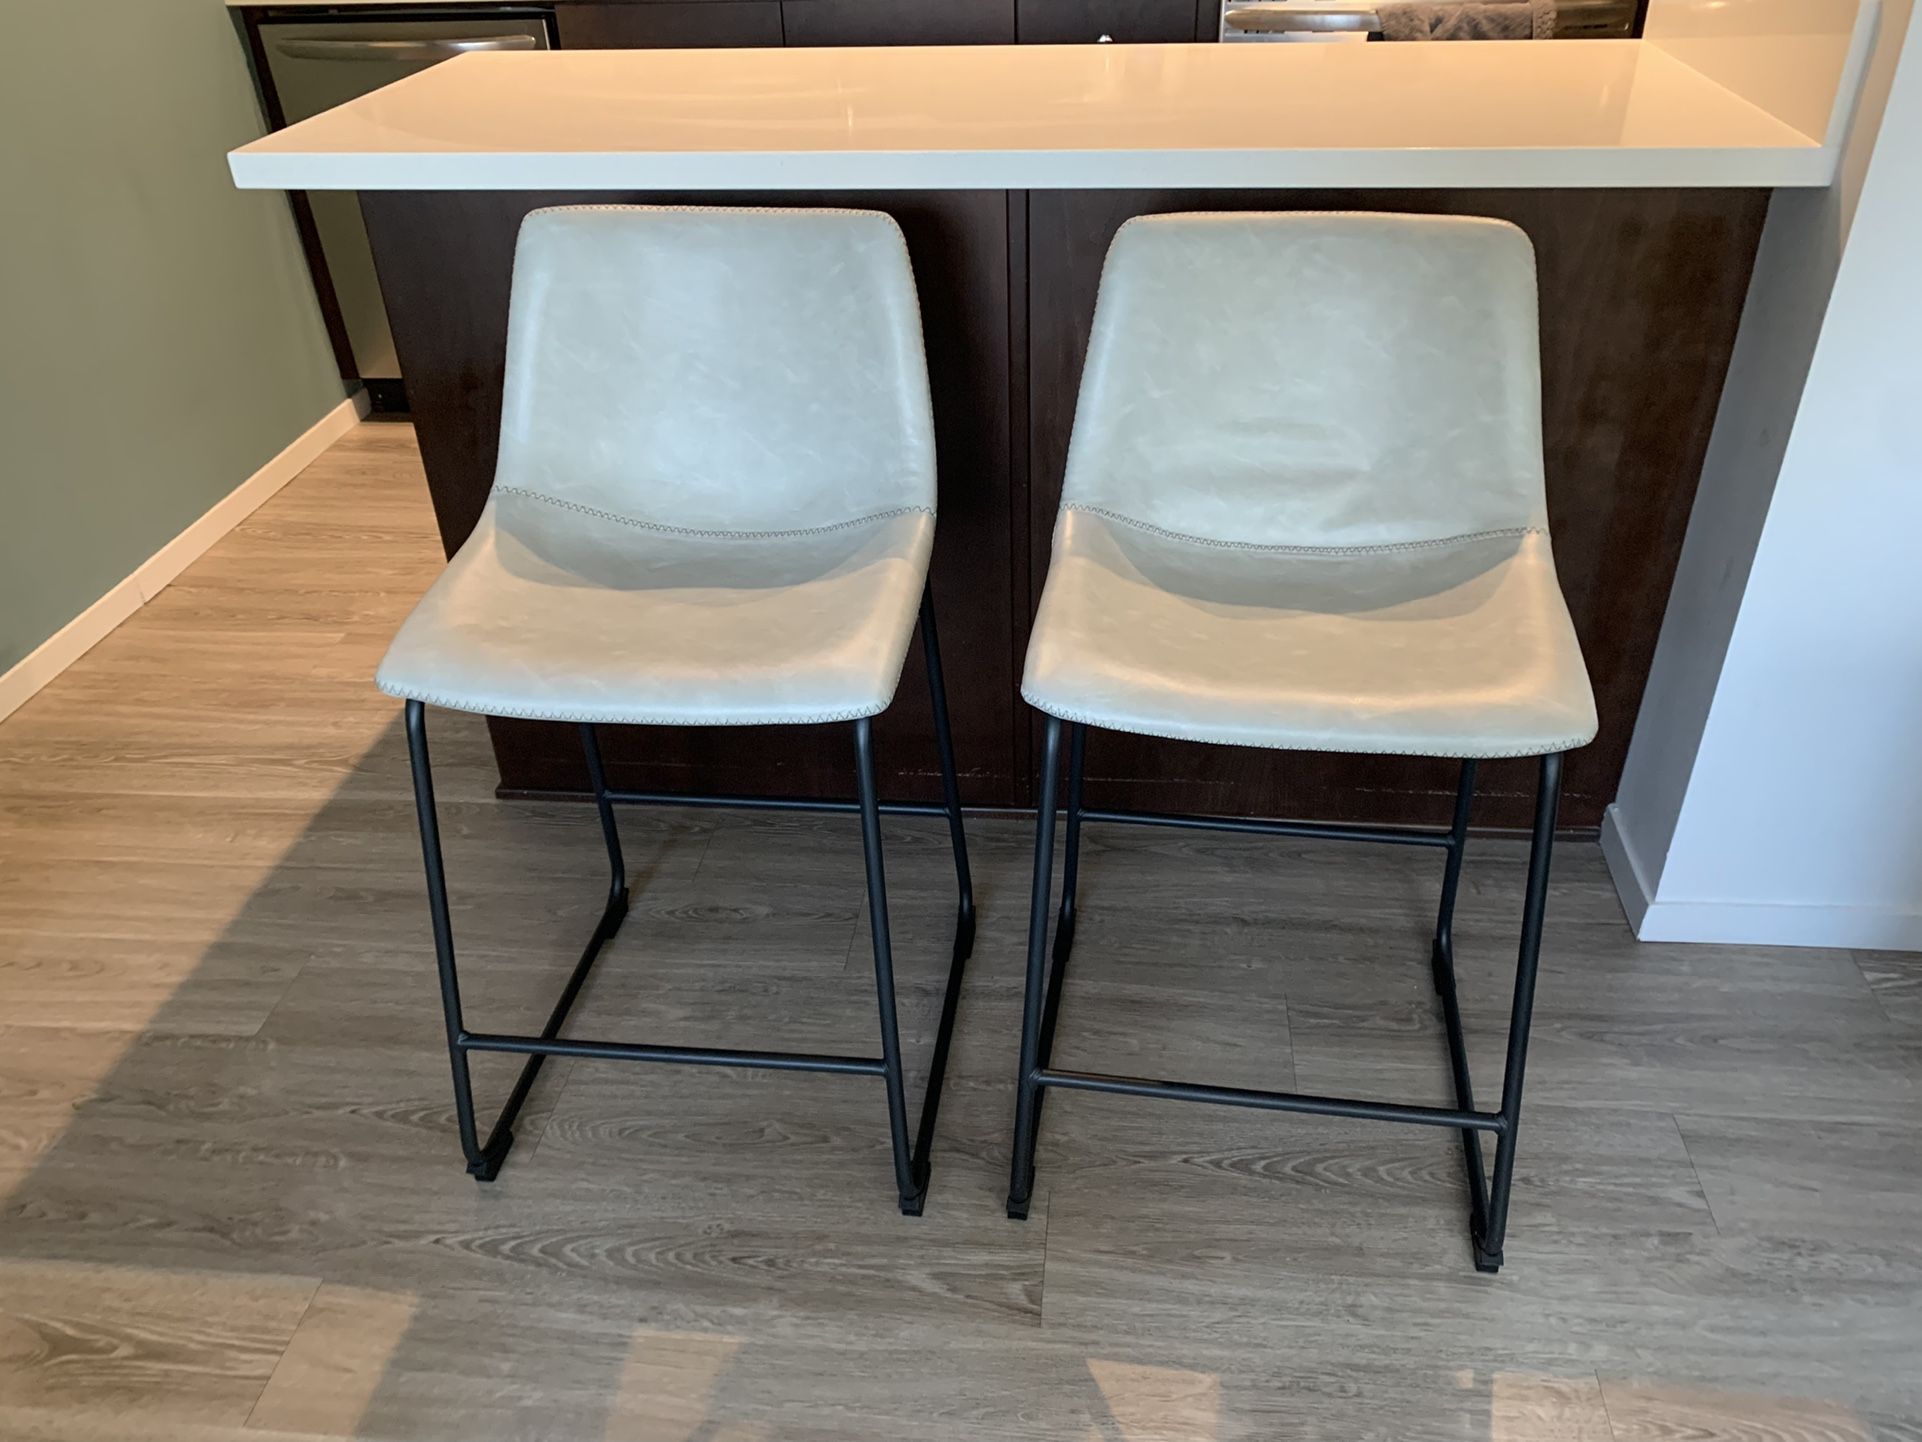 Counter height Stools  